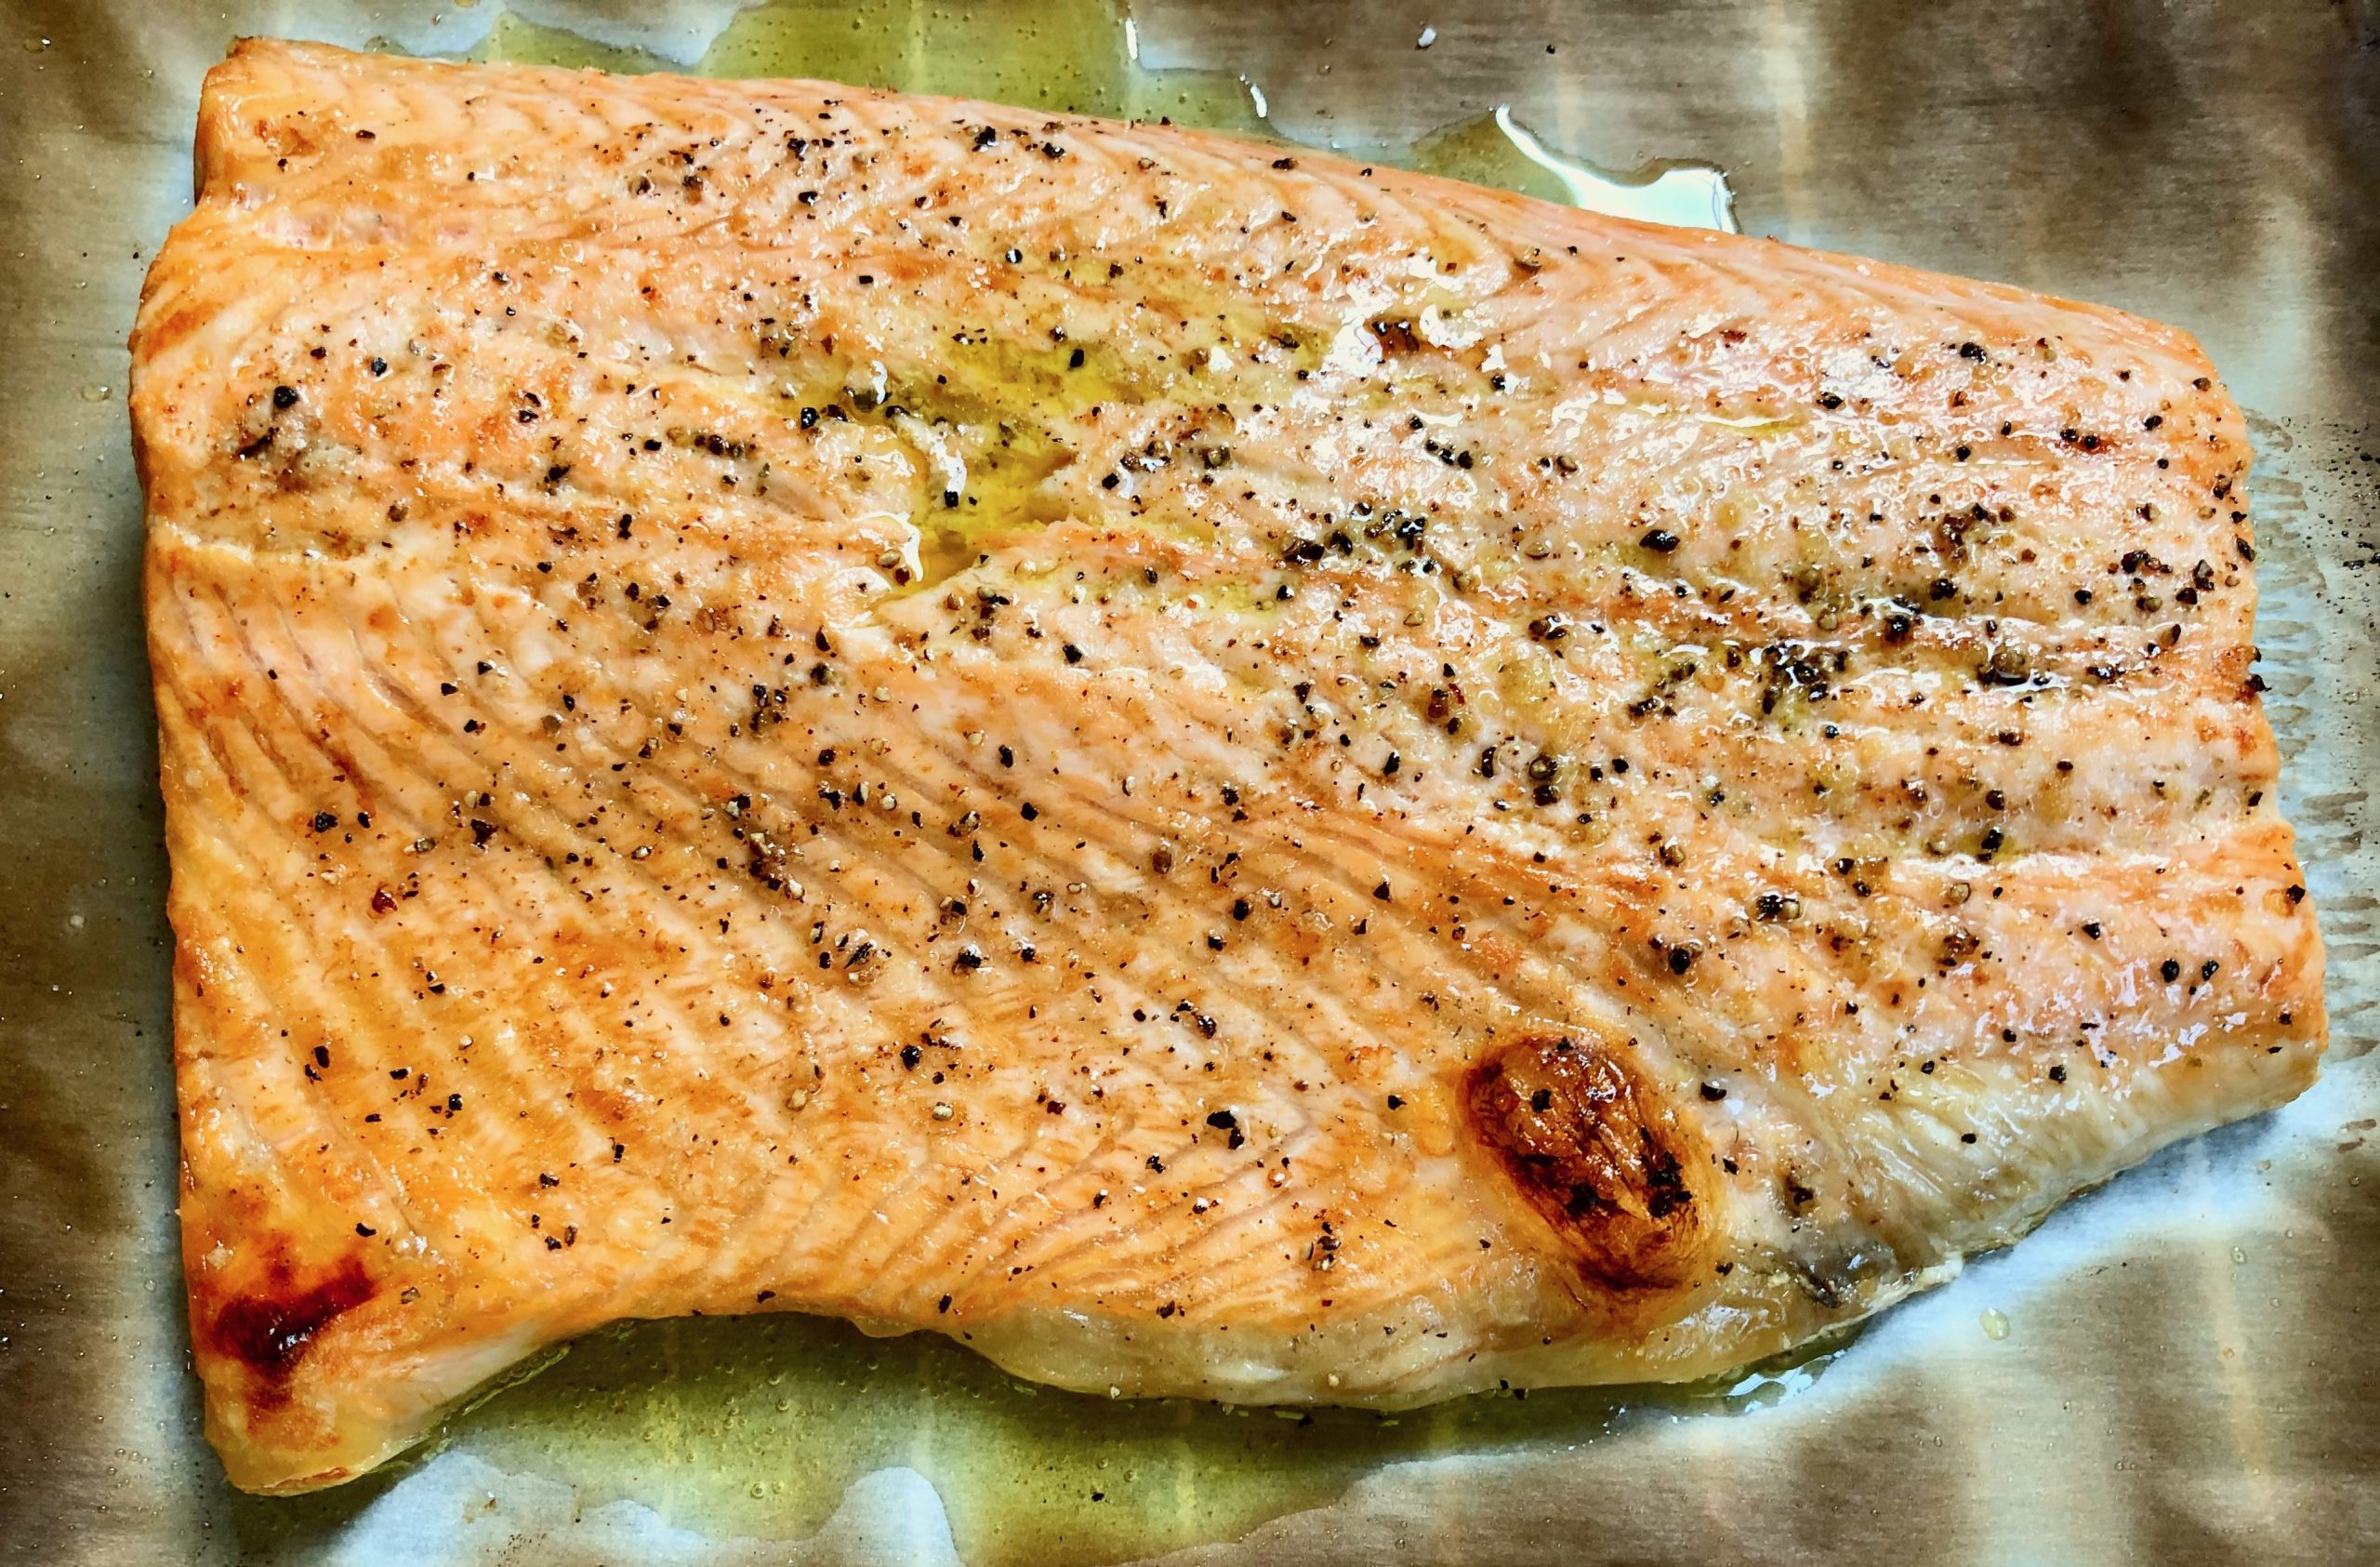 broil salmon for 8-10 mins